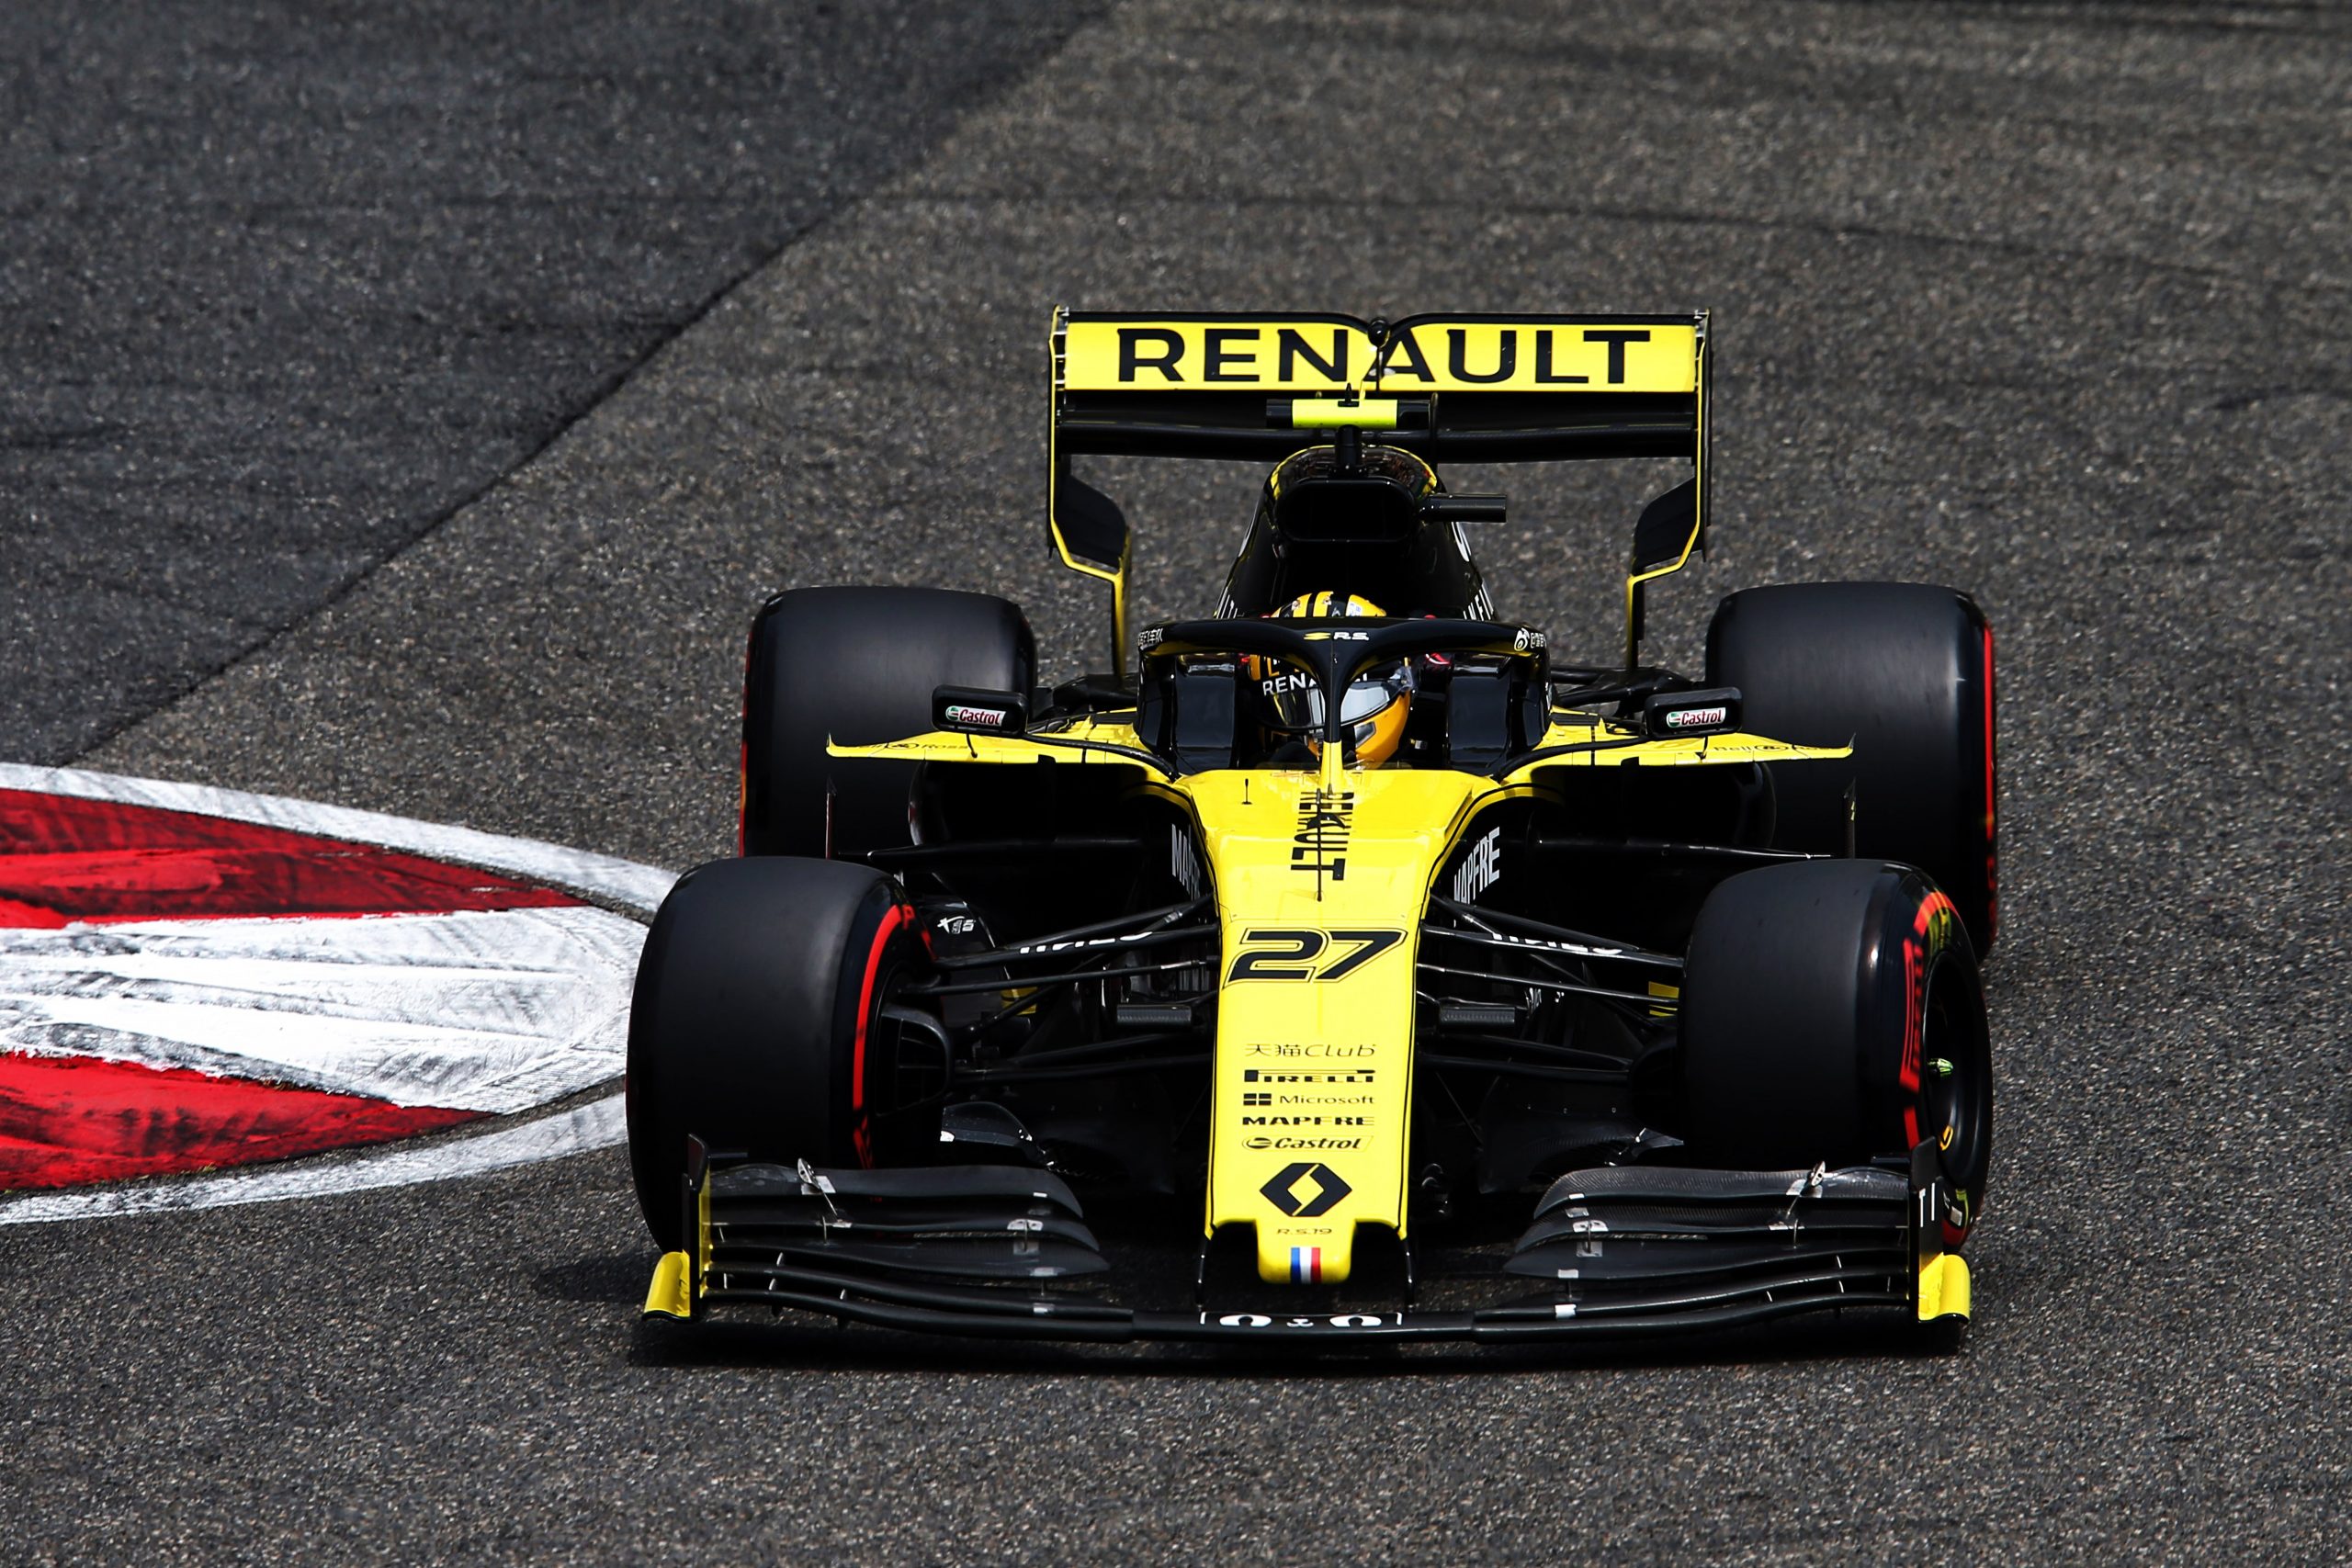 2019 Chinese Grand Prix Qualifying Nico Hulkenberg scaled 3 The Best F1 News Site | F1 Chronicle